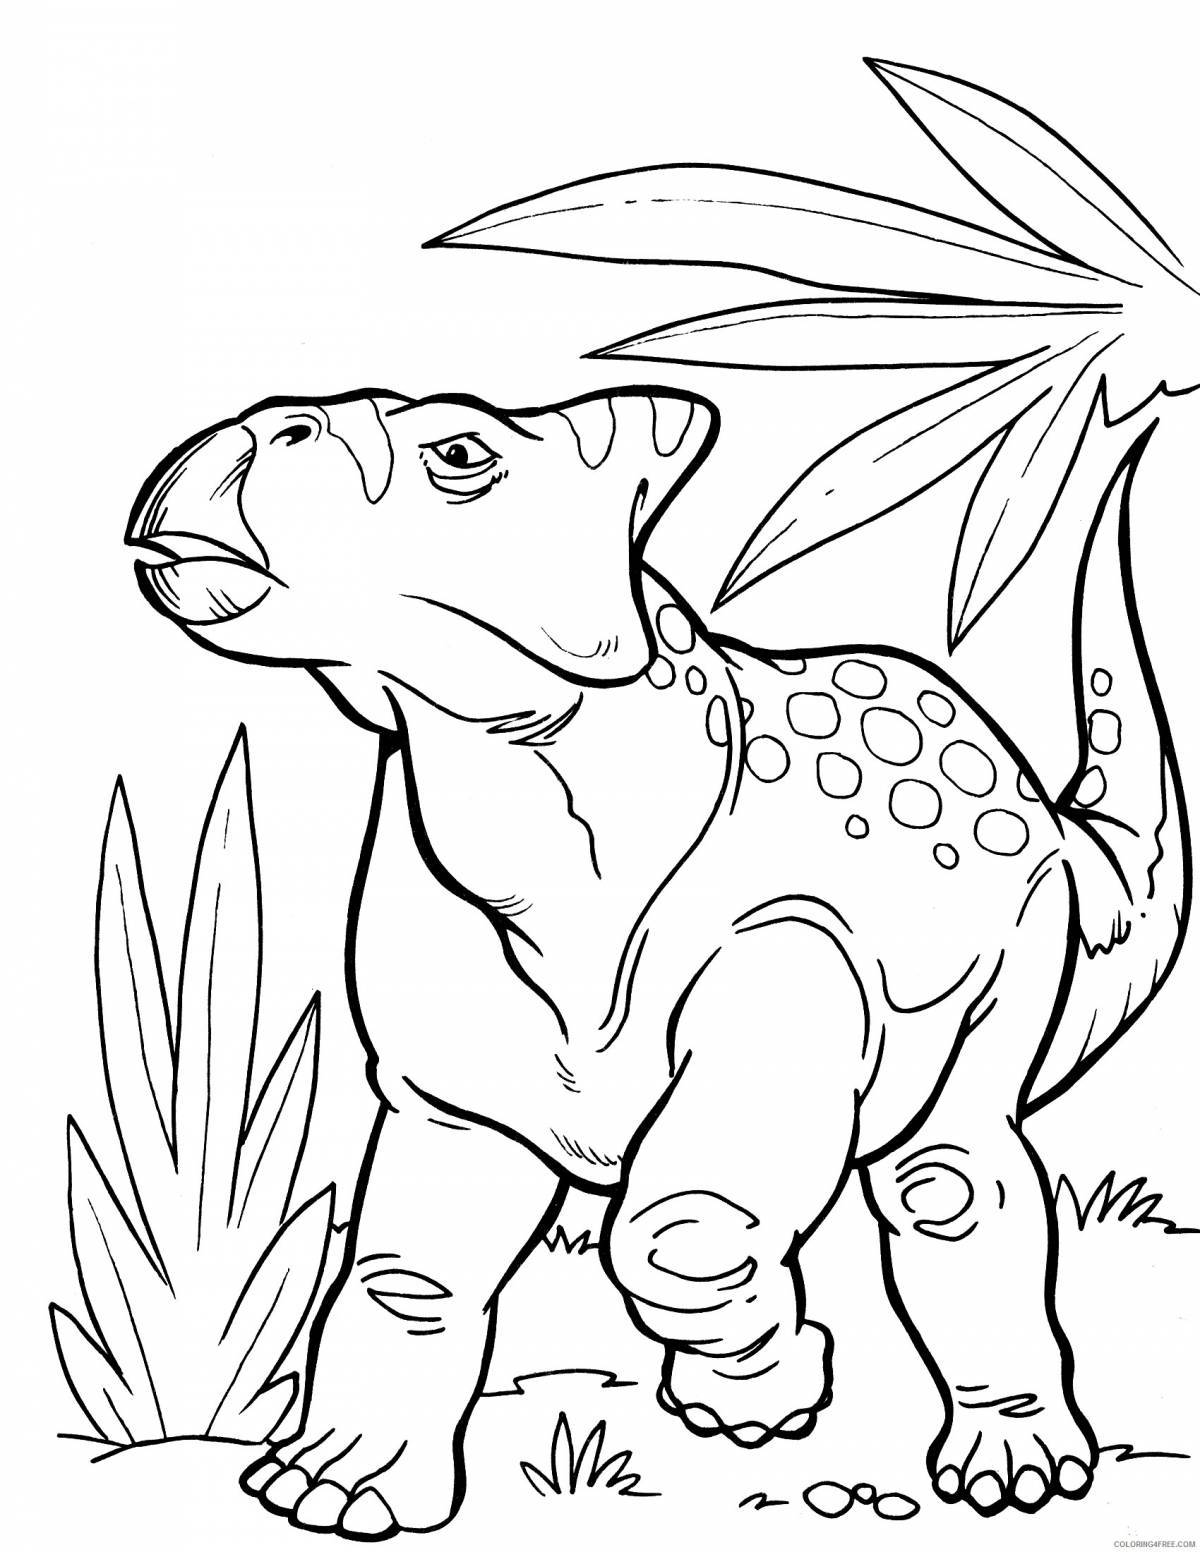 Outstanding dinosaur coloring page for 4-5 year olds